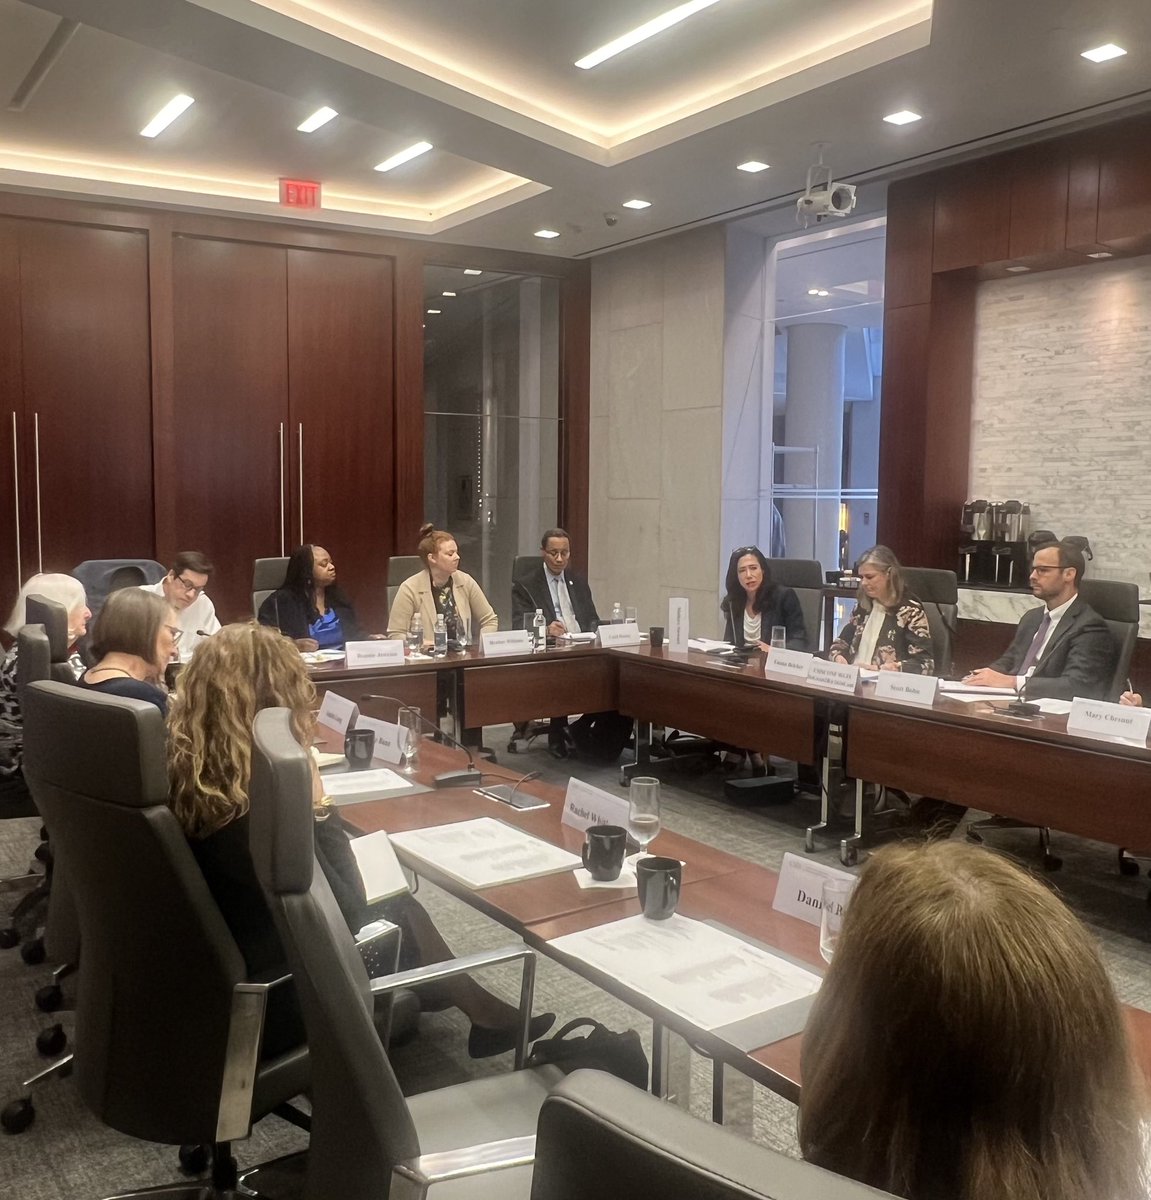 This morning, I attended a roundtable discussion on the International Security Advisory Board’s report titled “Deterrence in a World of Nuclear Multipolarity”. Thank you @CSIS for organizing and hosting this productive meeting. @StateADS #nucleardisarmament